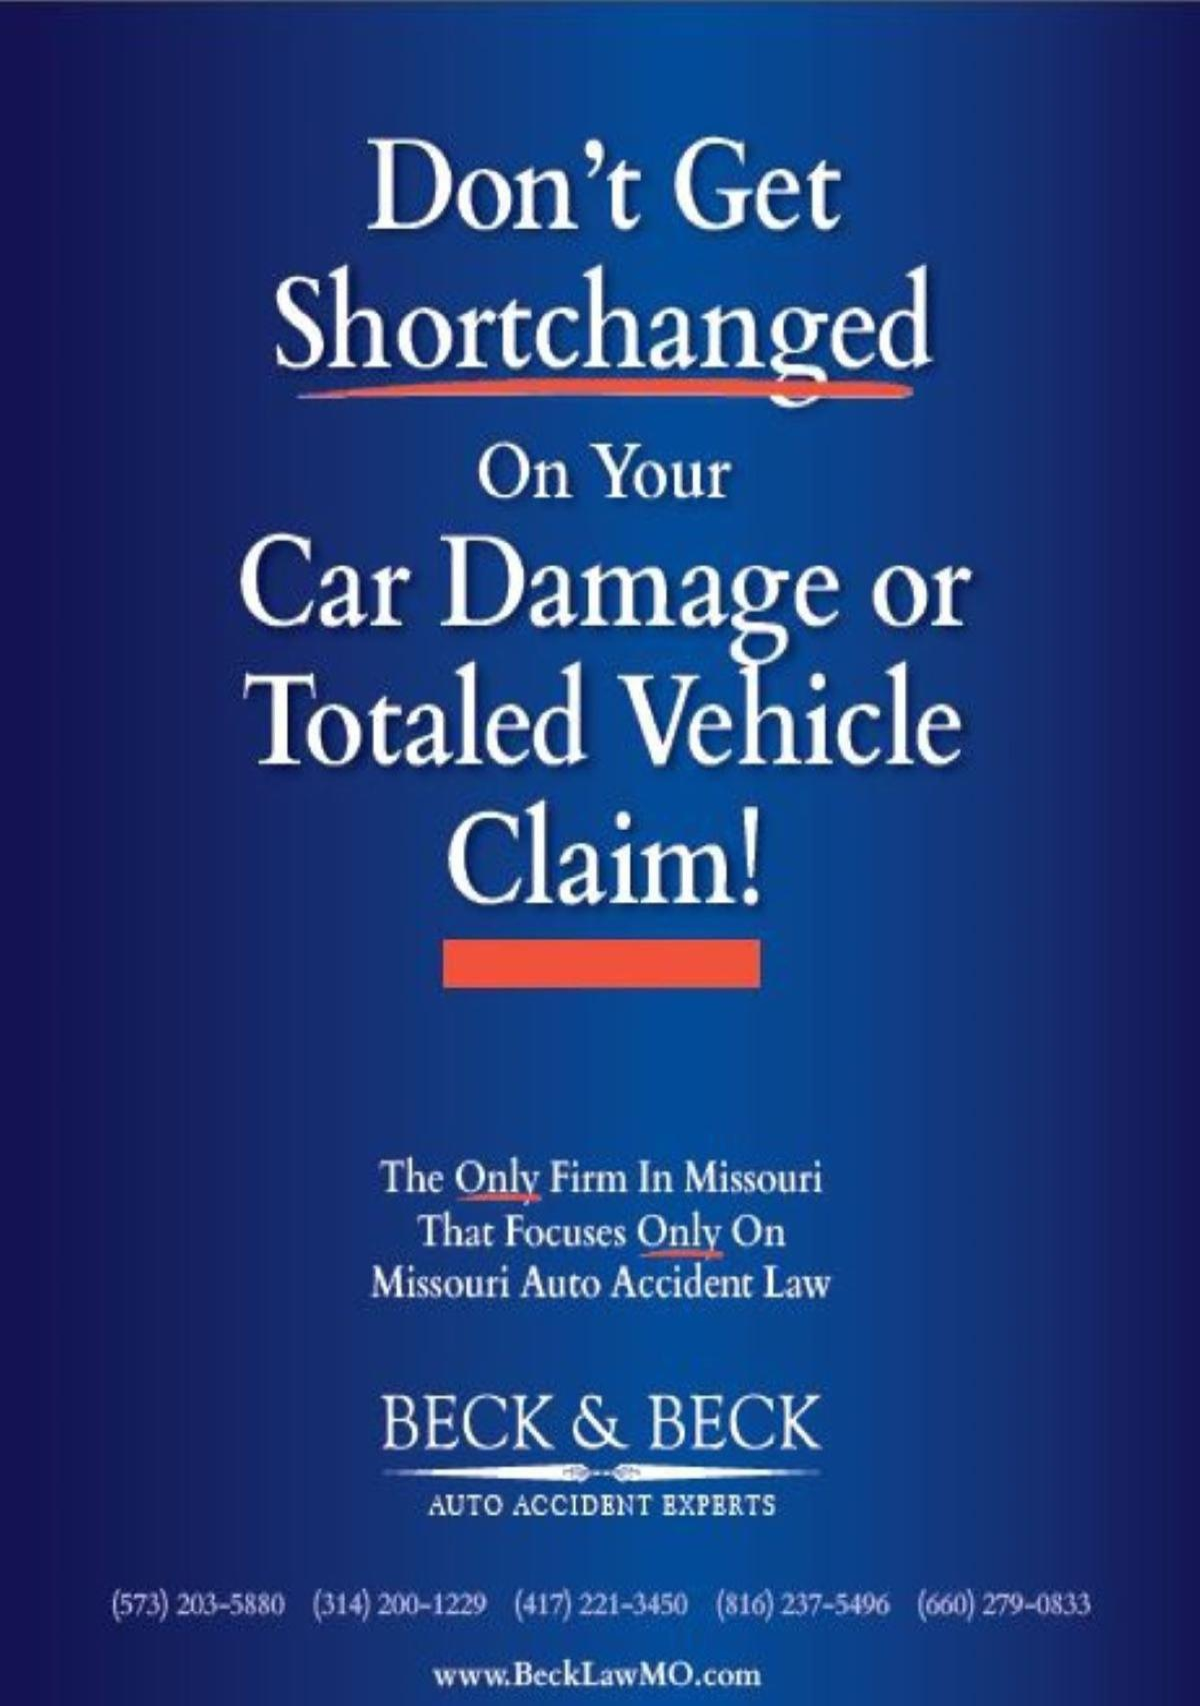 Don't Get Shortchanged on Your Car Damage or Totaled Vehicle Claim